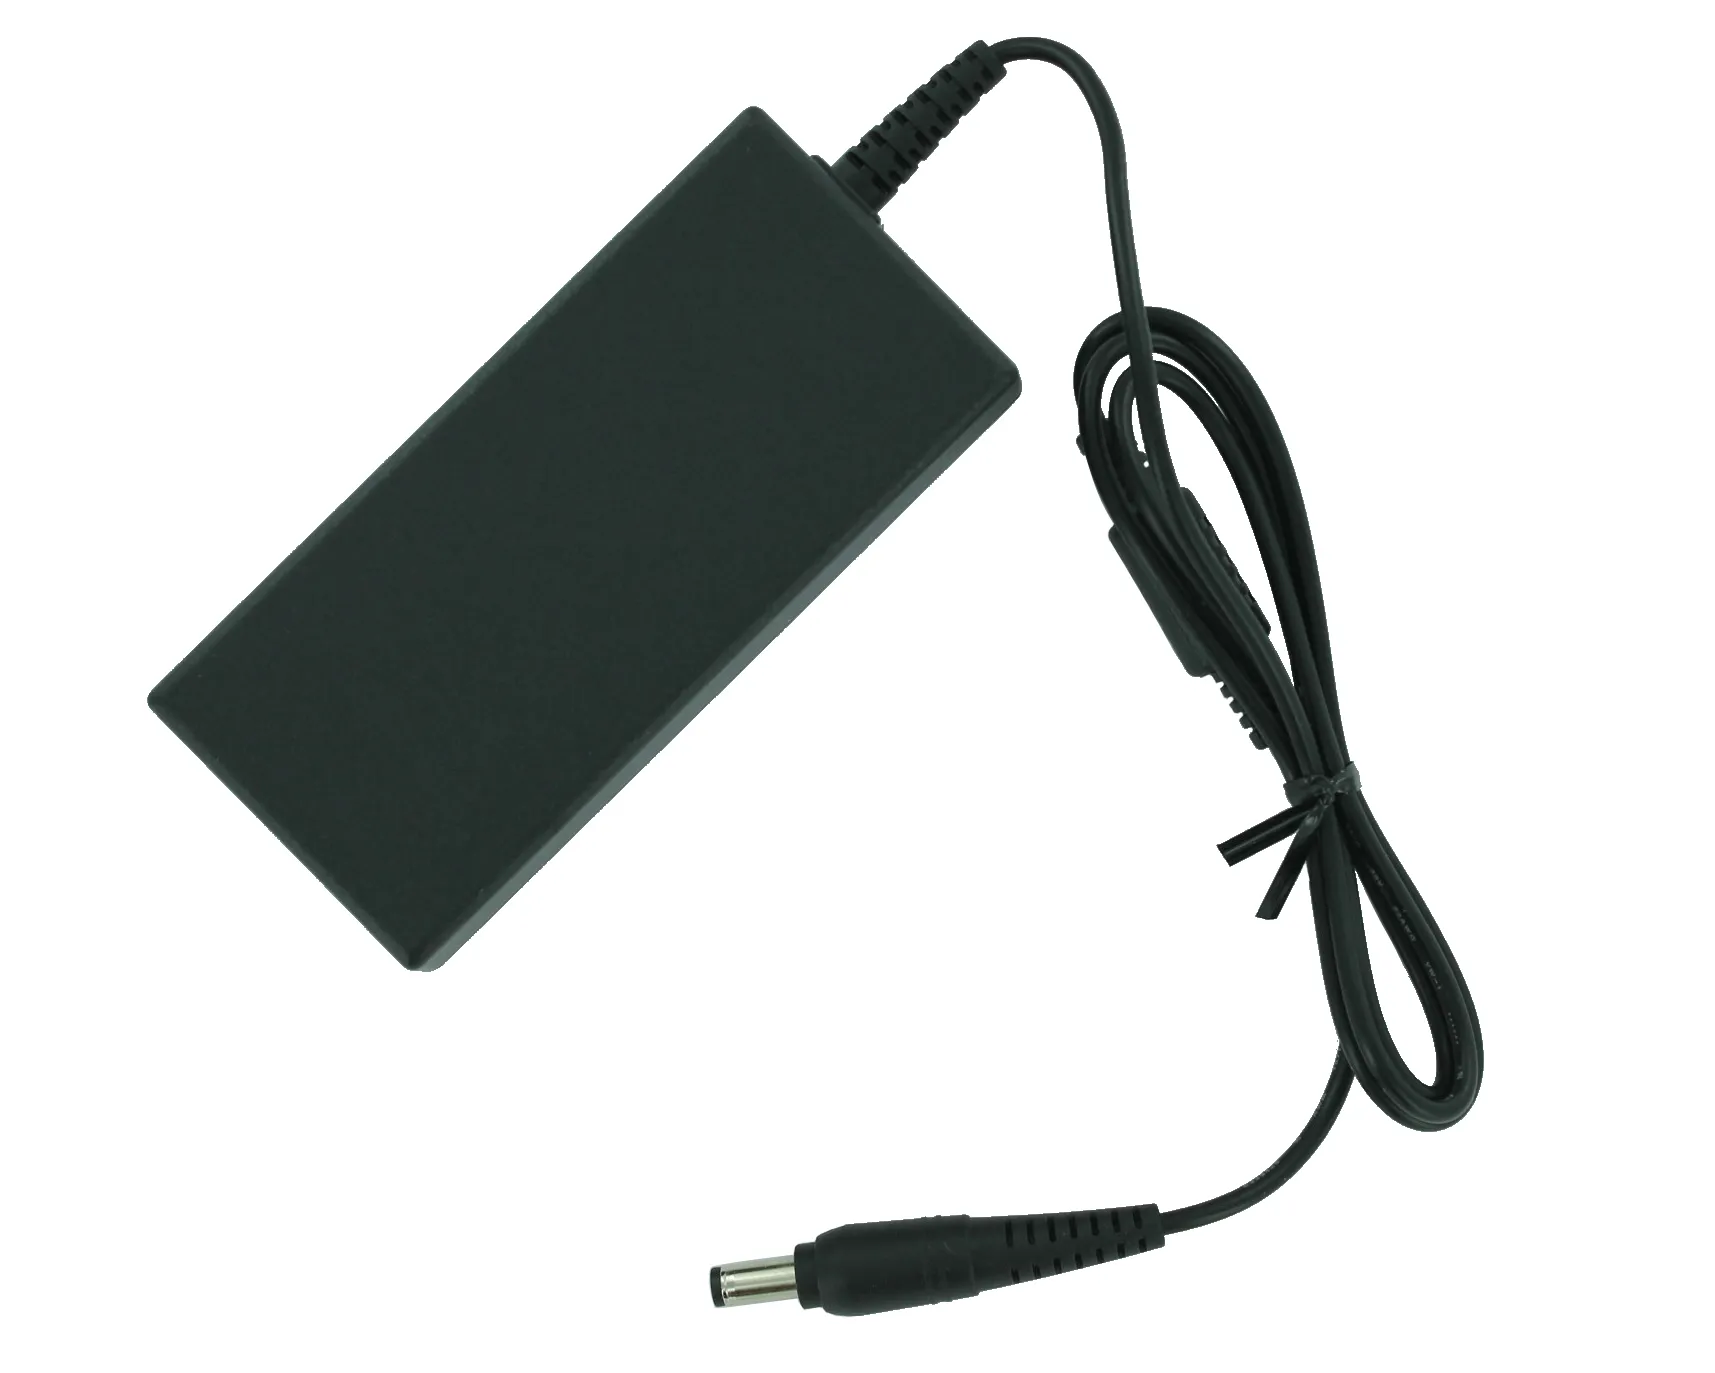 HP 290 G1 MICROTOWER PC - 3EC13EA Charger (AC Adapter) 911754-001